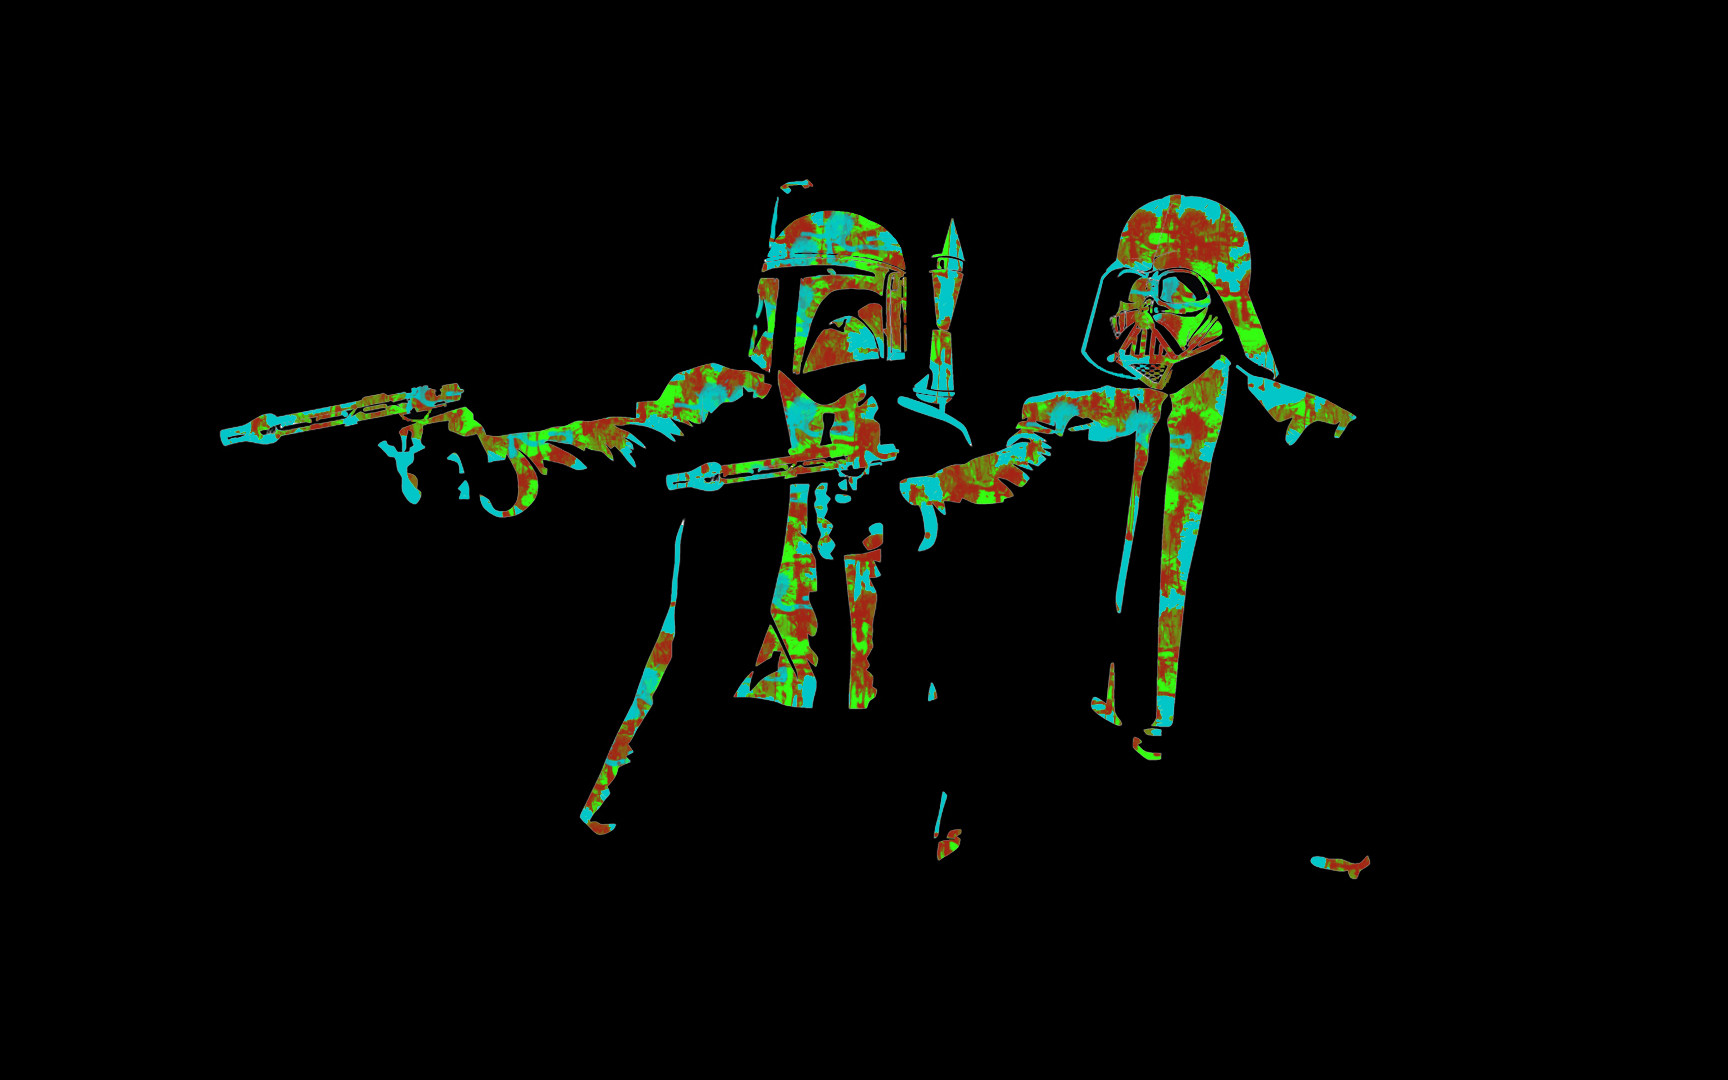 Re Color Of A Pulp Fiction Star Wars Wallpaper